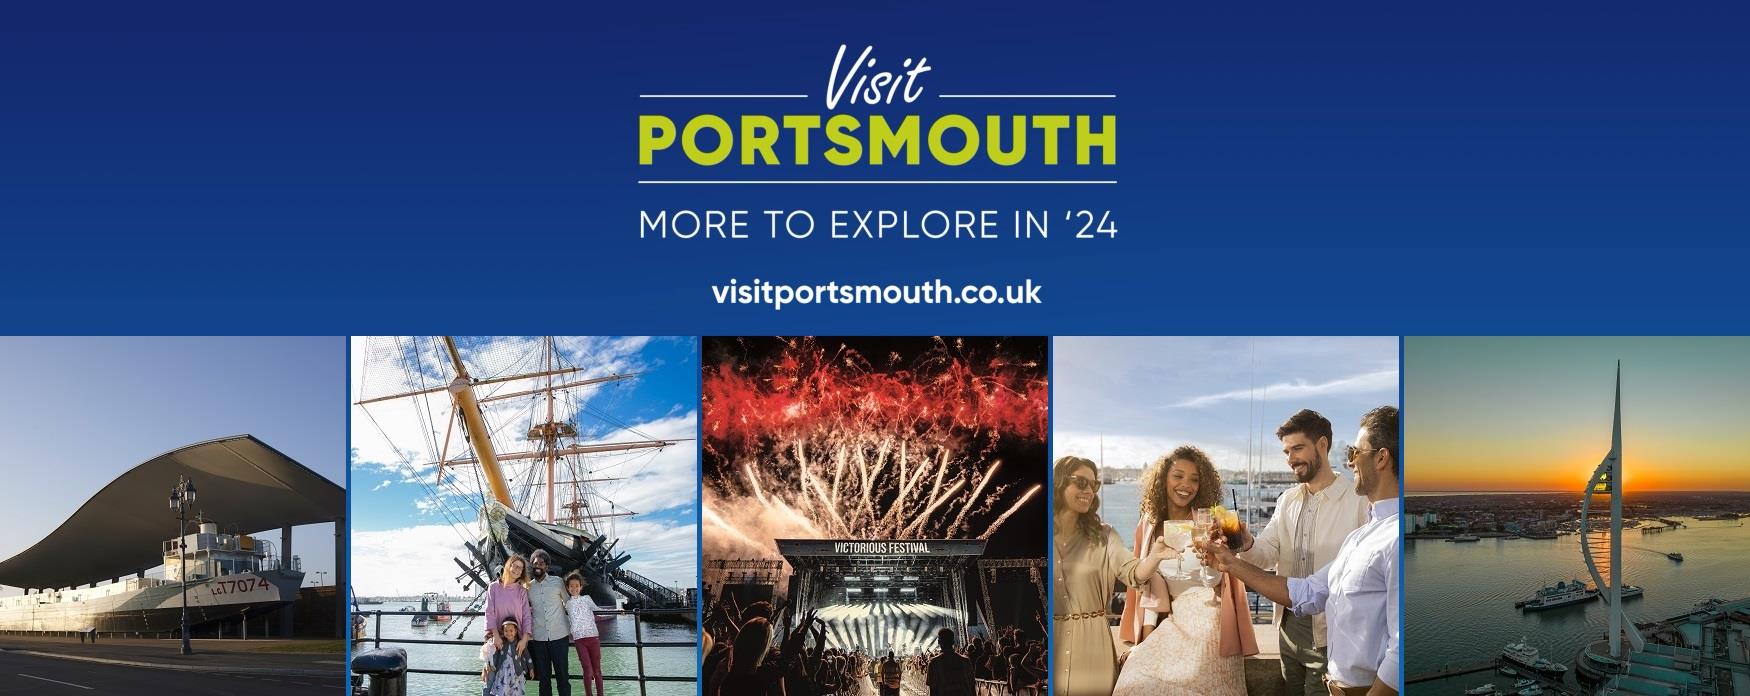 Visit Portsmouth - More to explore in '24!